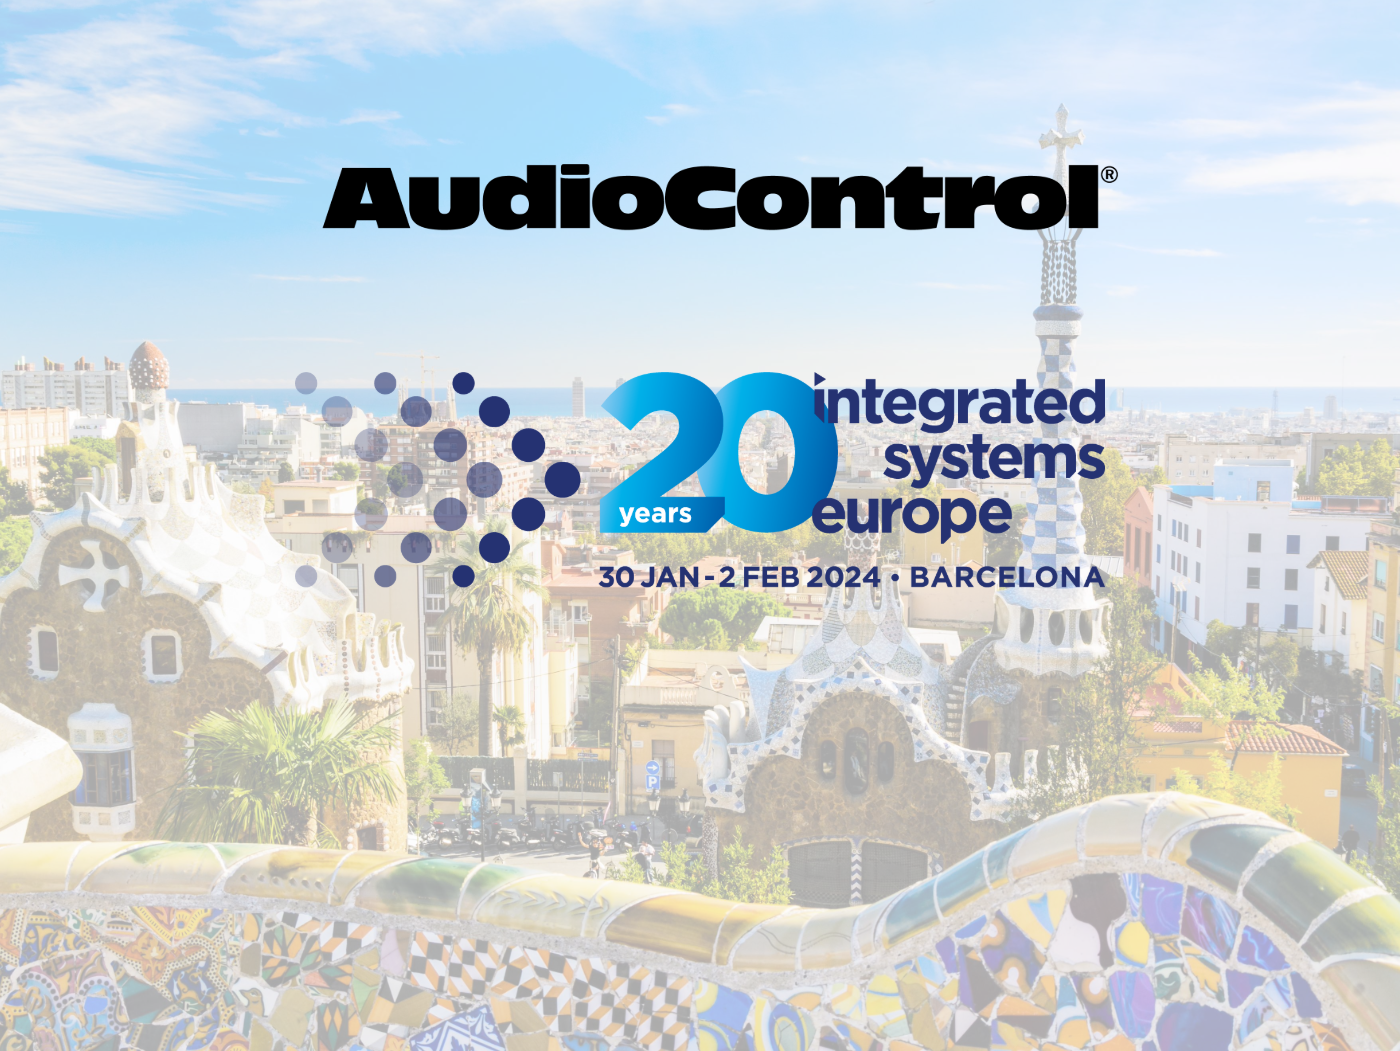 AudioControl is coming to ISE 2024